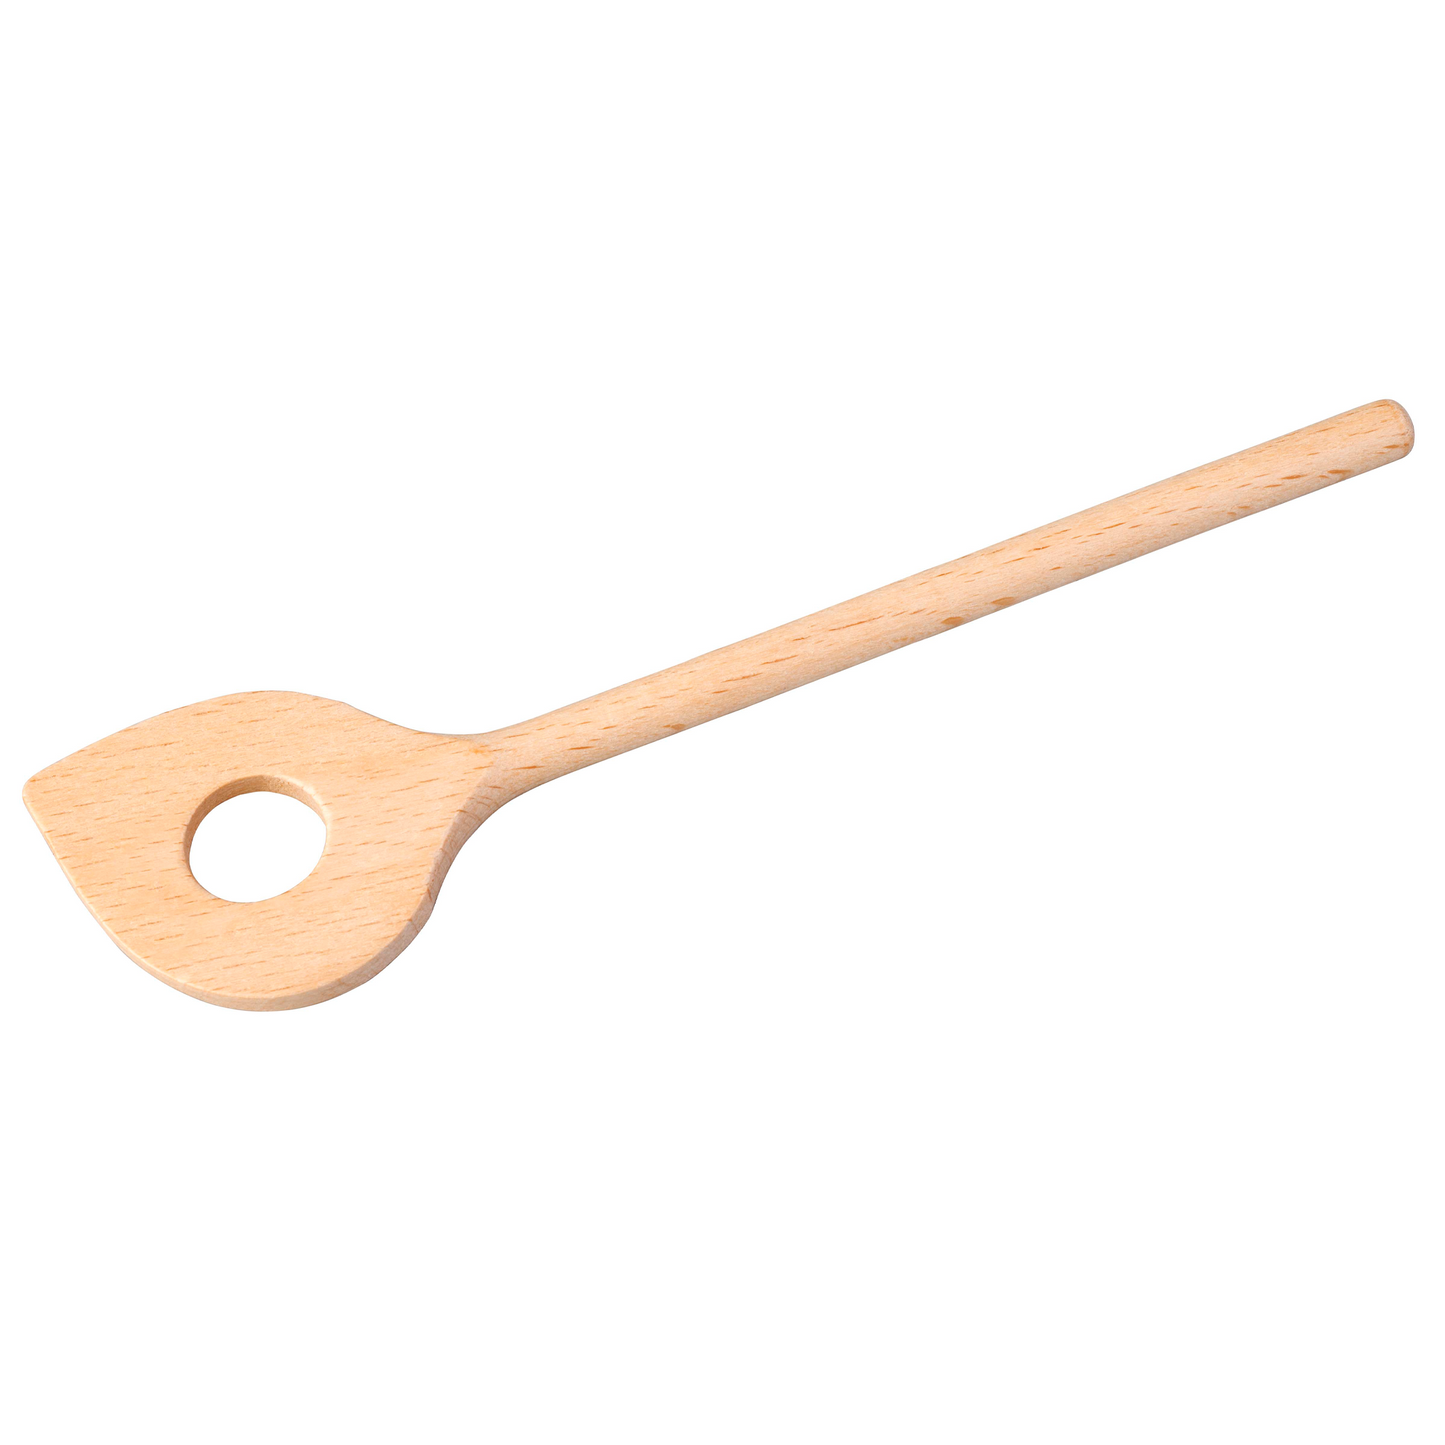 Wooden spoon with hole - Nienhuis AMI